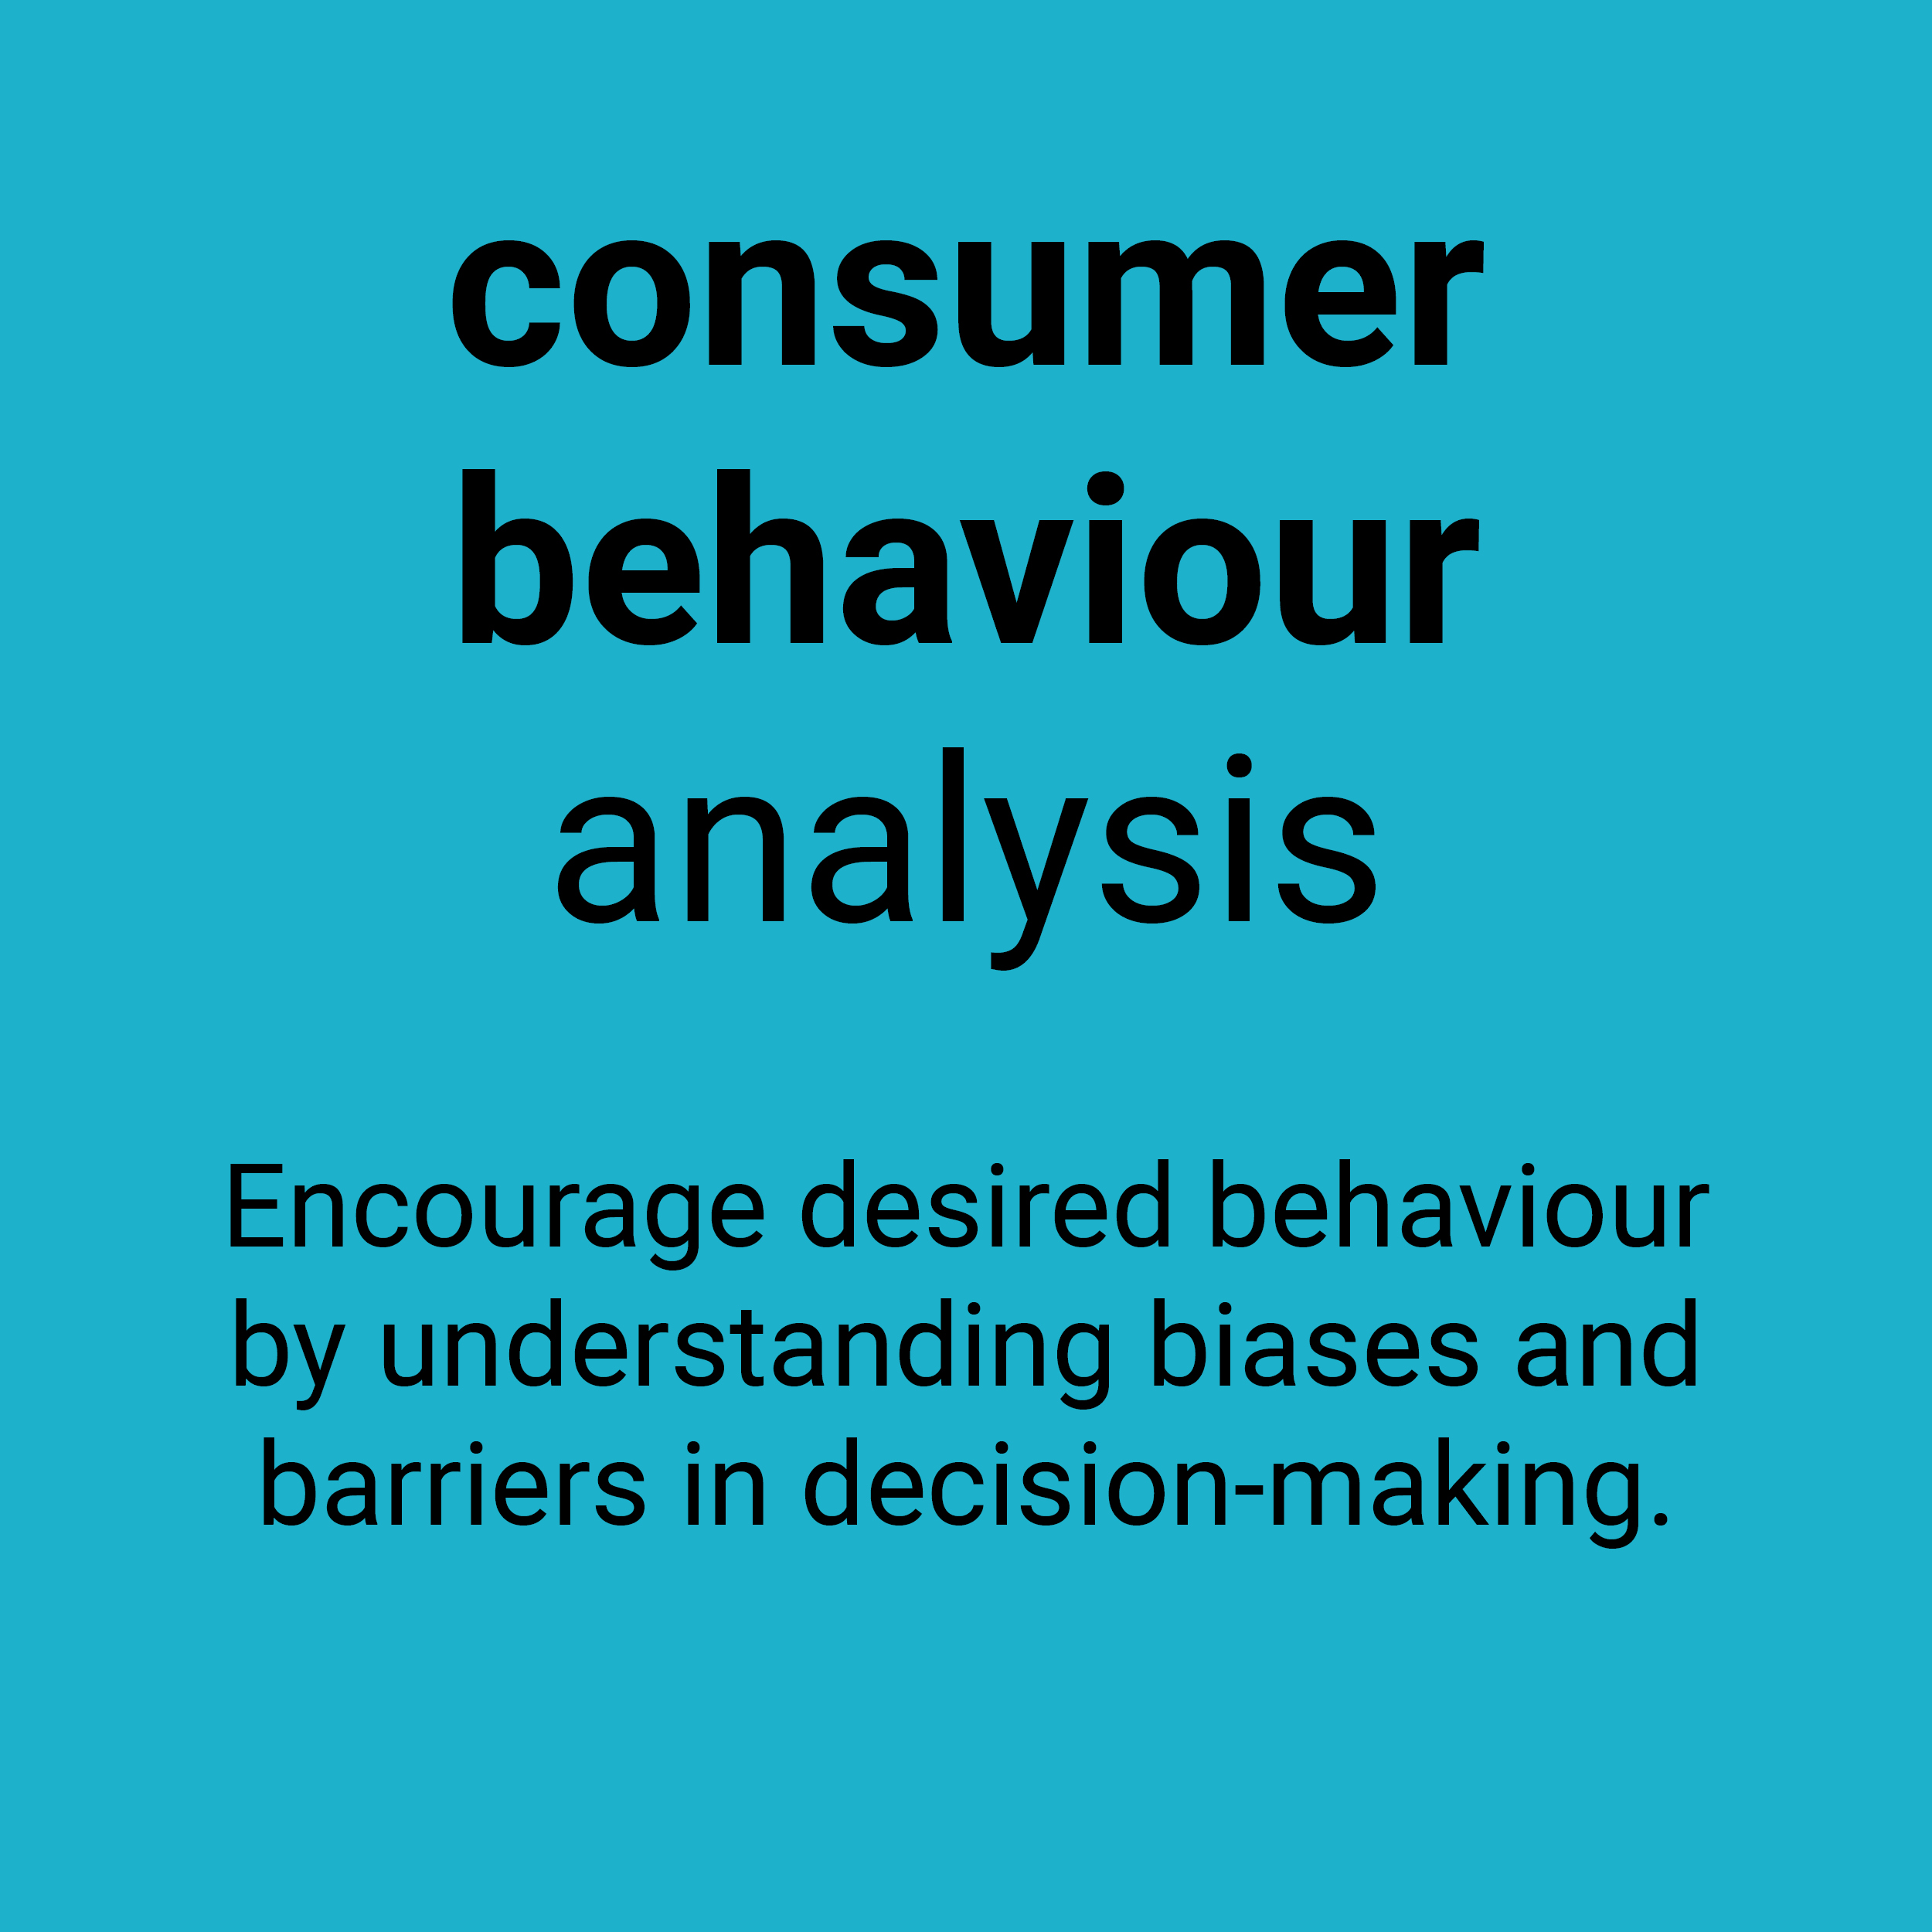 Consumer behaviour analysis. Encourage desired behaviour by understanding biases and barriers in decision-making.